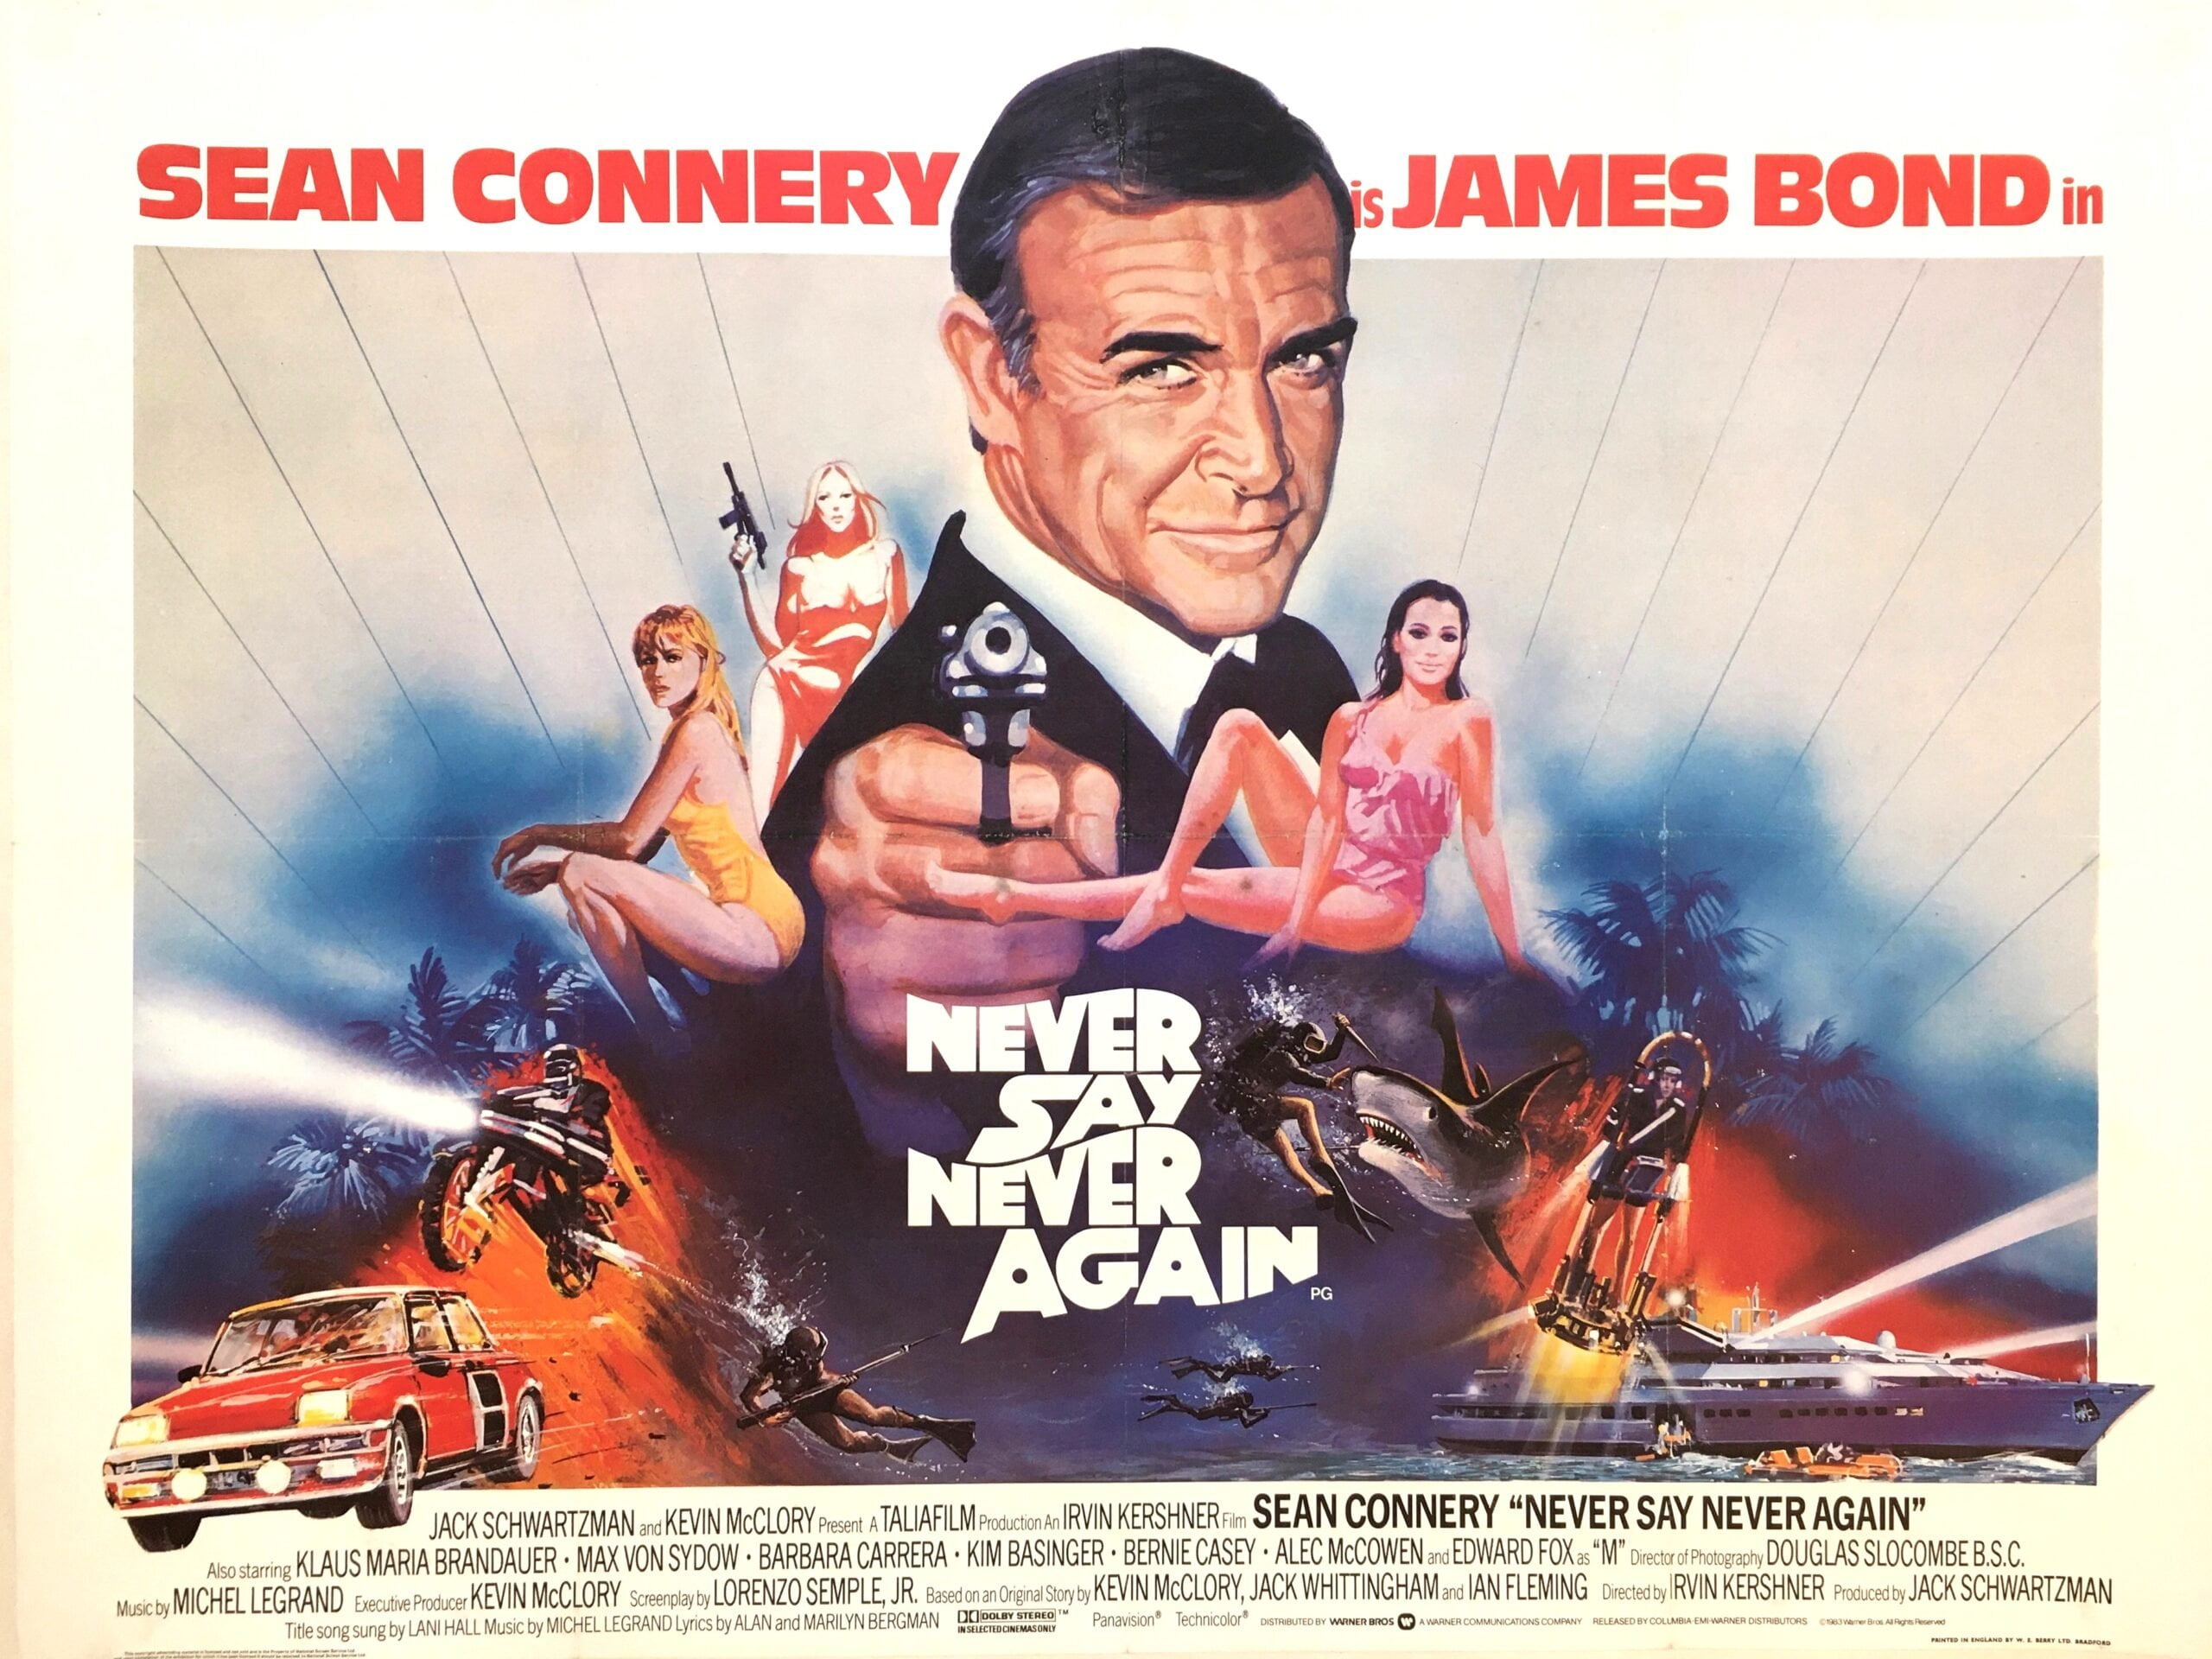 Original vintage cinema movie poster for Sean Connery as James Bond 007 in Never Say Never Again